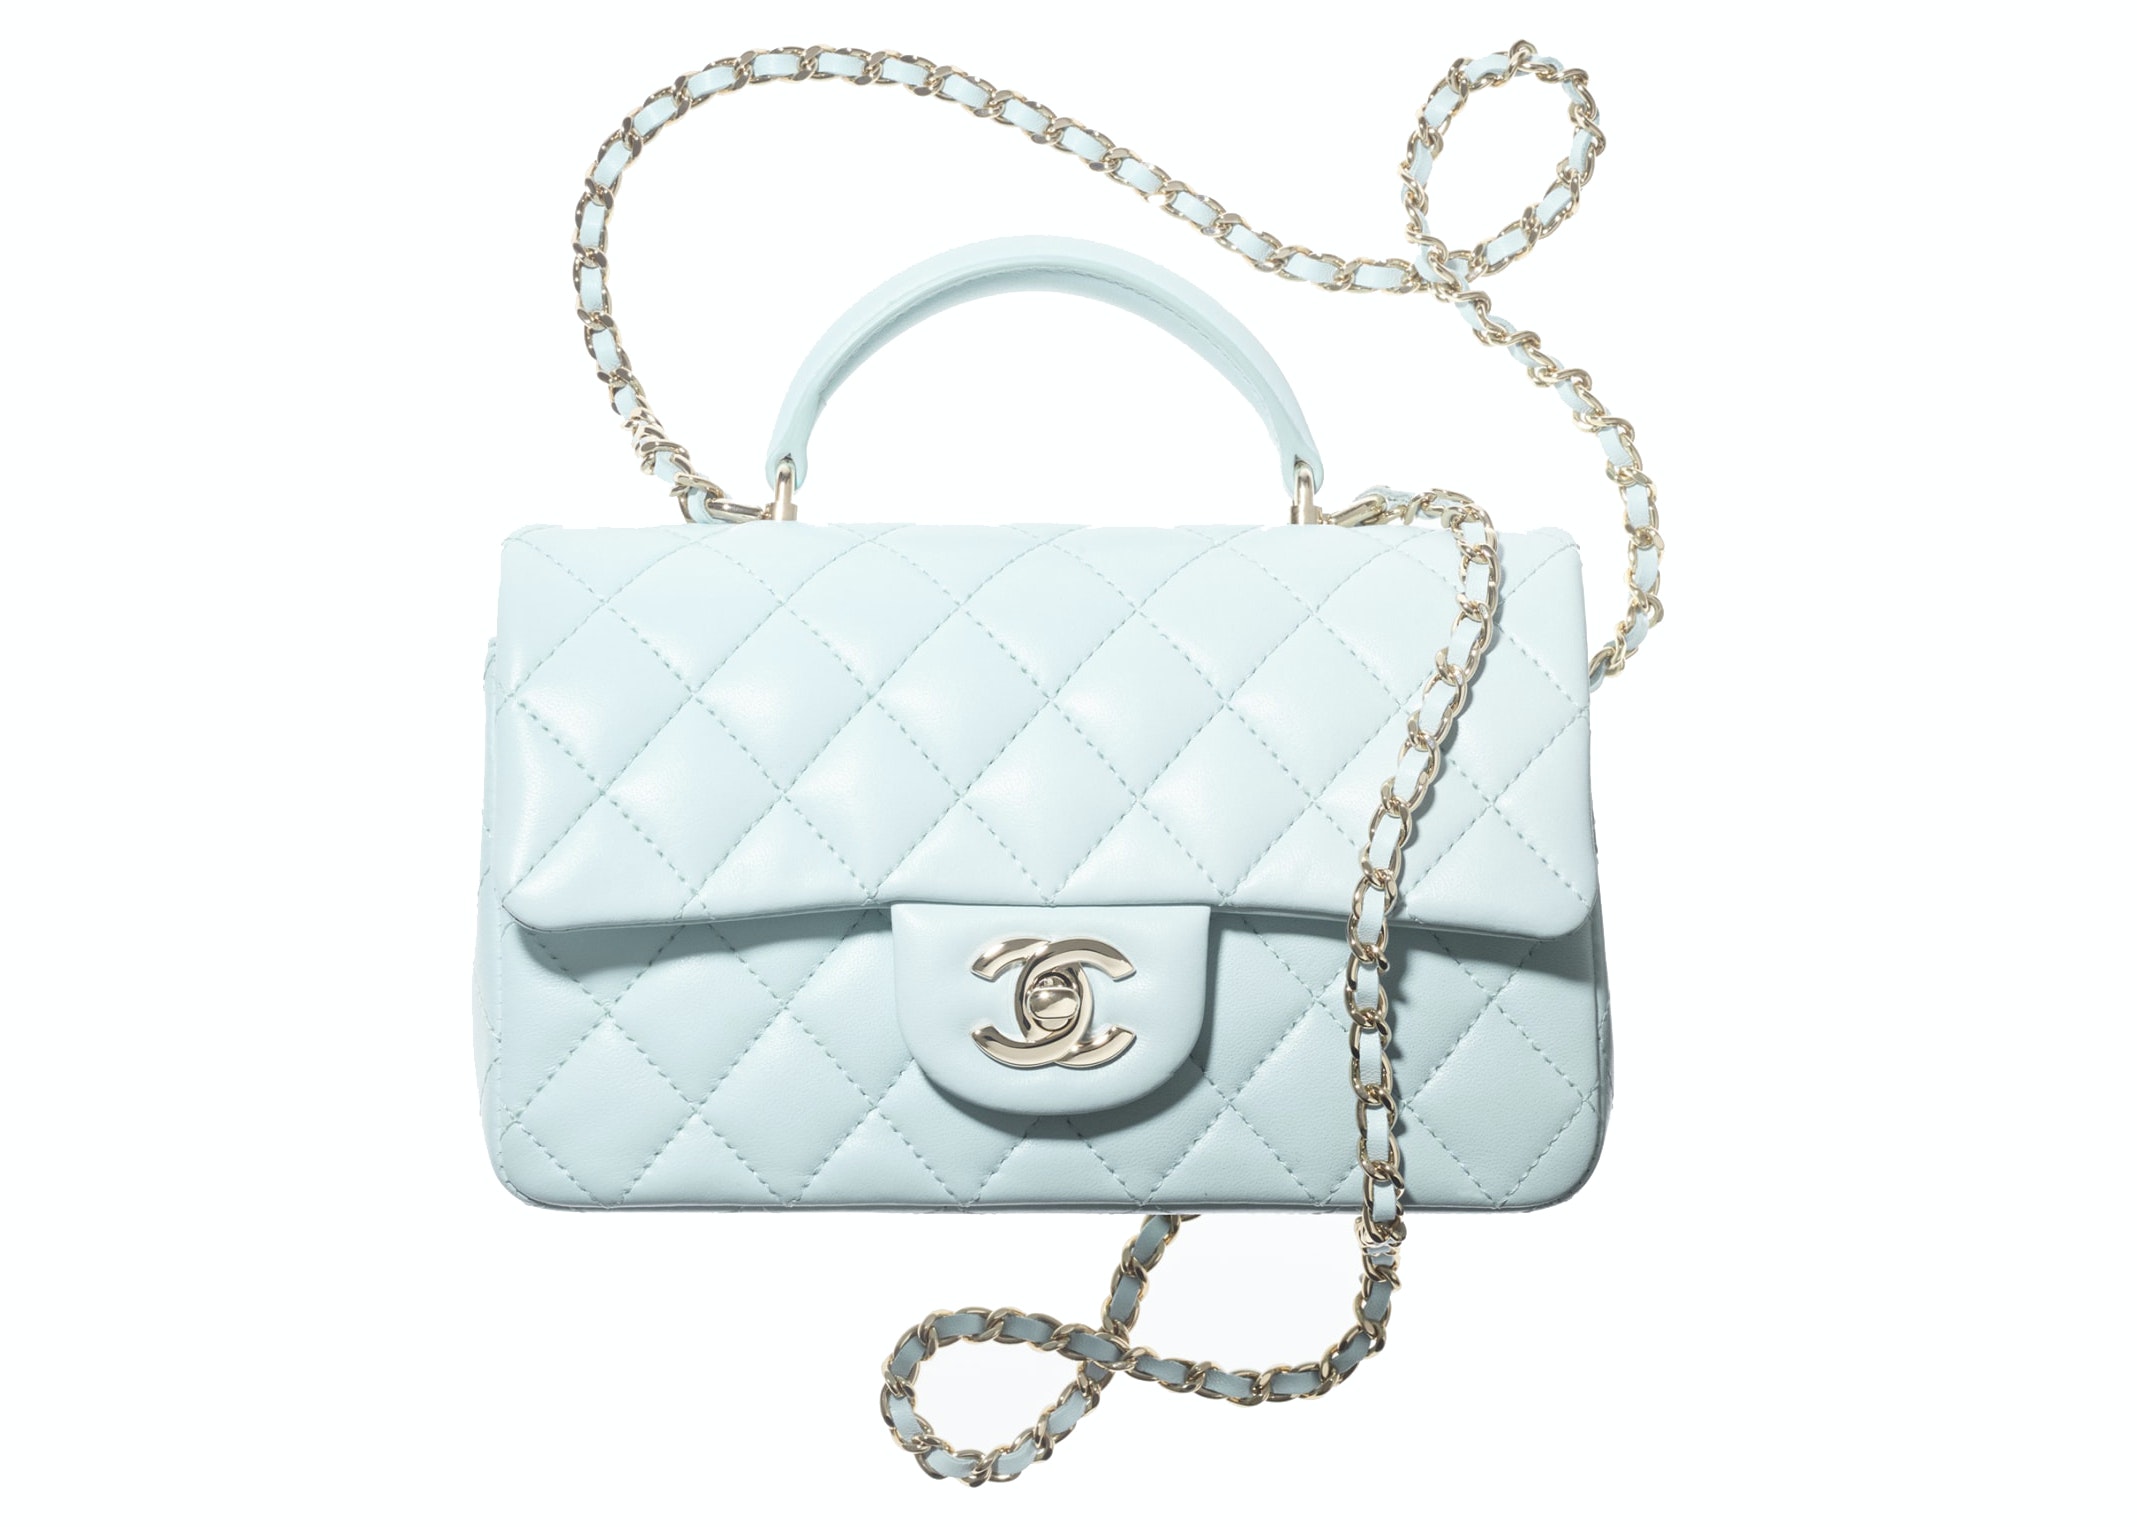 CHANEL  Bags  Chanel Mini Flap Bag Only Box For Sale  Poshmark